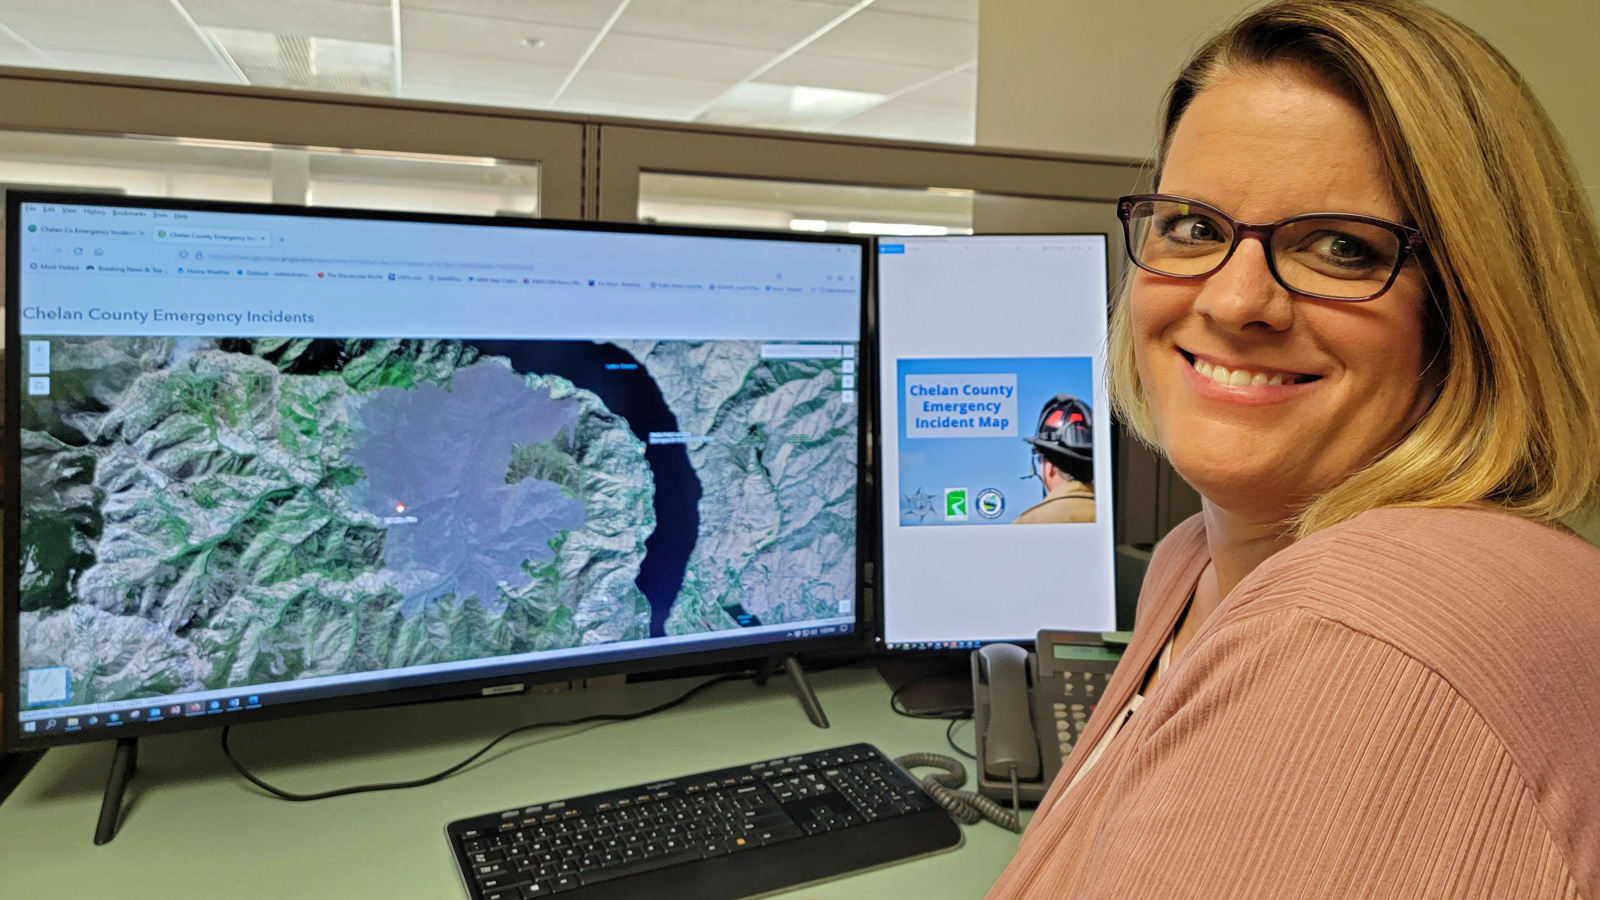 GIS tech creates emergency incidents map for wildfire response